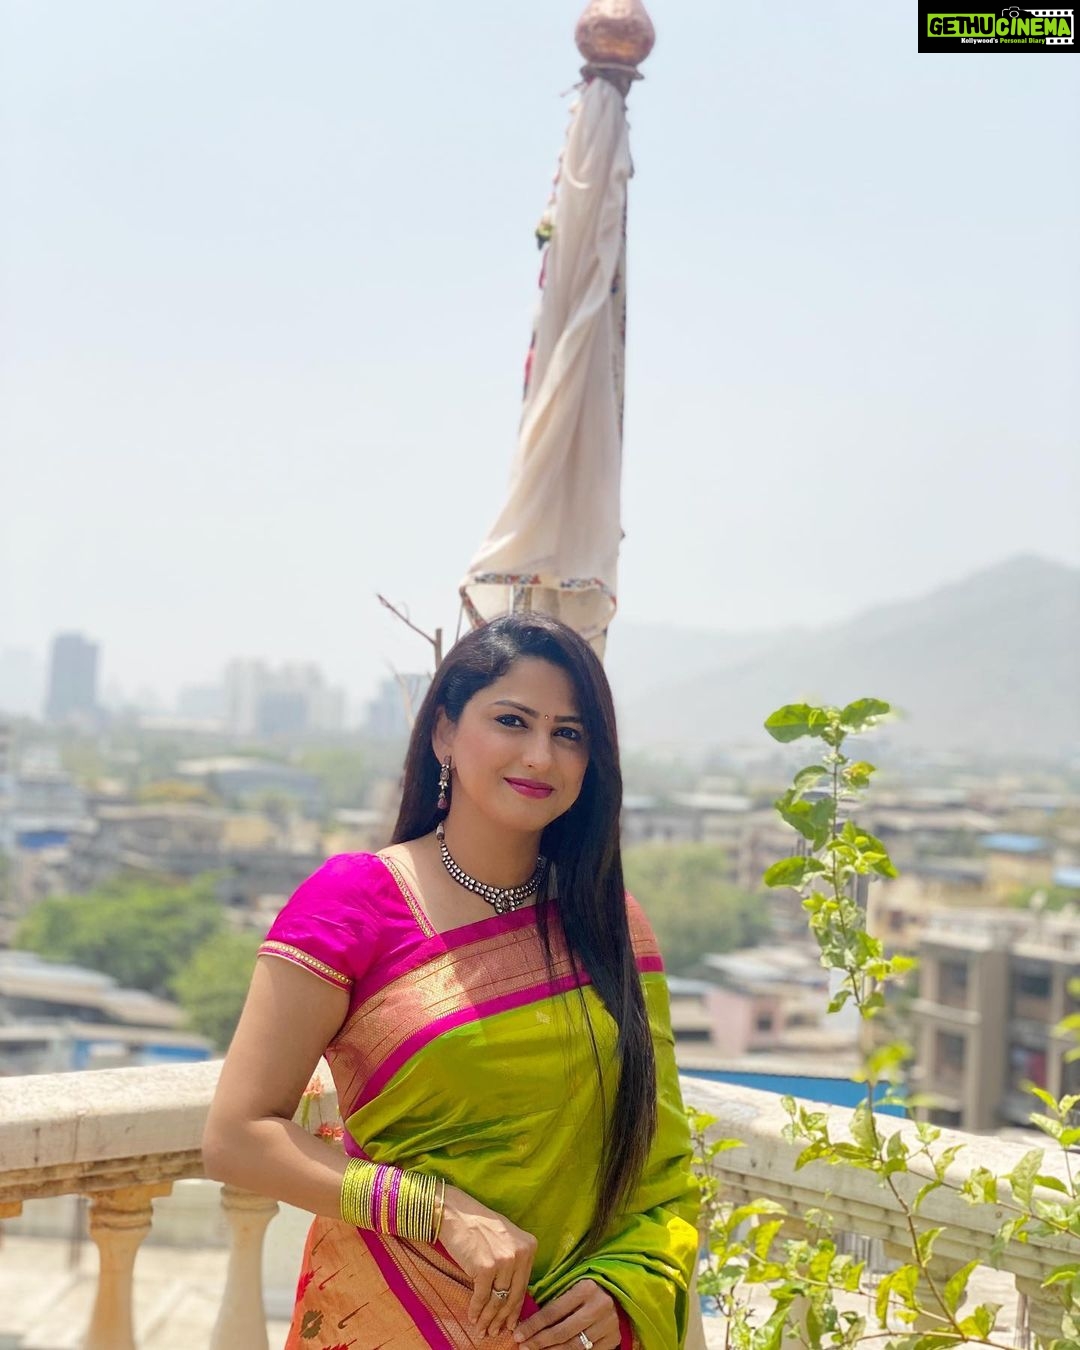 Rucha Hasabnis - 126K Likes - Most Liked Instagram Photos